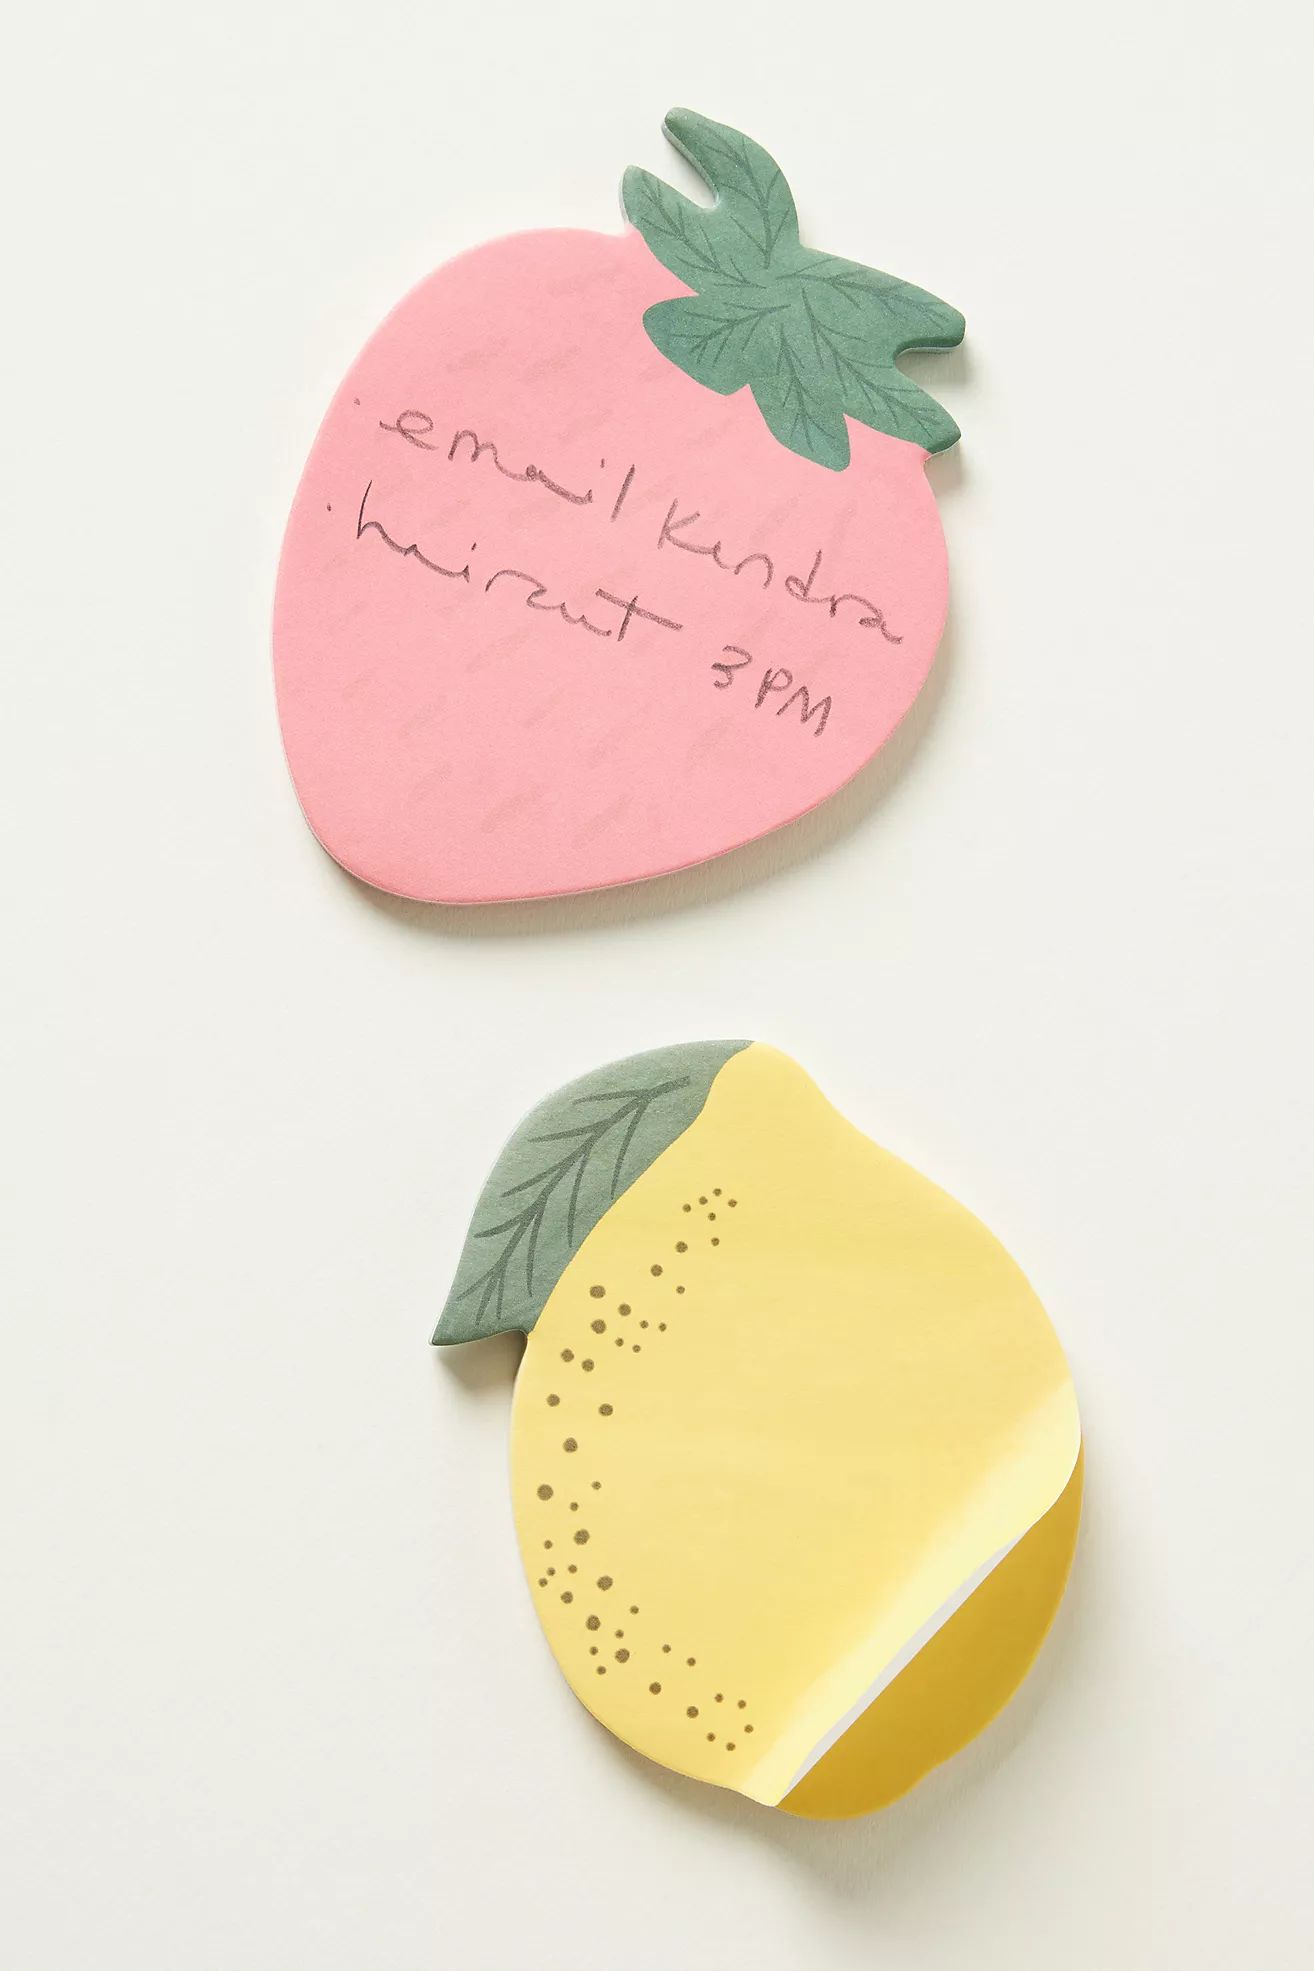 Rifle Paper Co. Fruit Sticky Notes | Anthropologie (US)